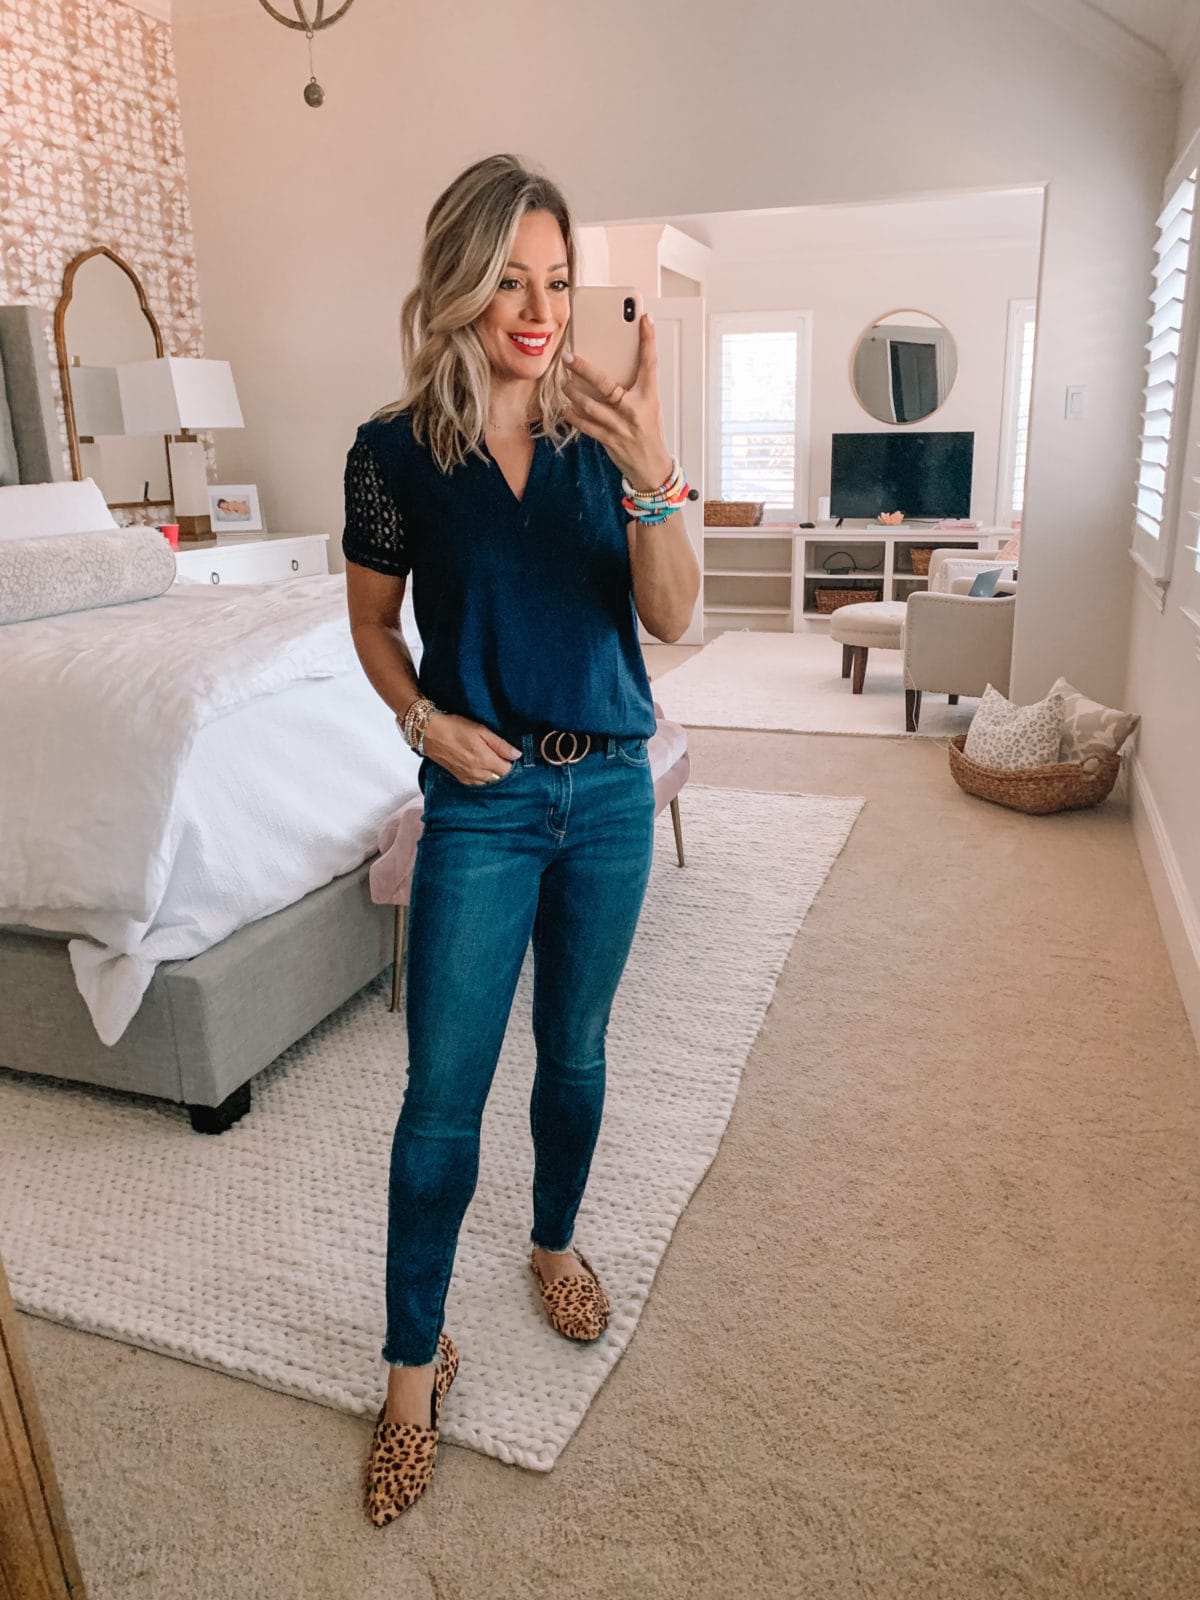 Amazon Fashion Finds, Lace Sleeved Tee, Jeans, Leopard Flats, Circle Belt 